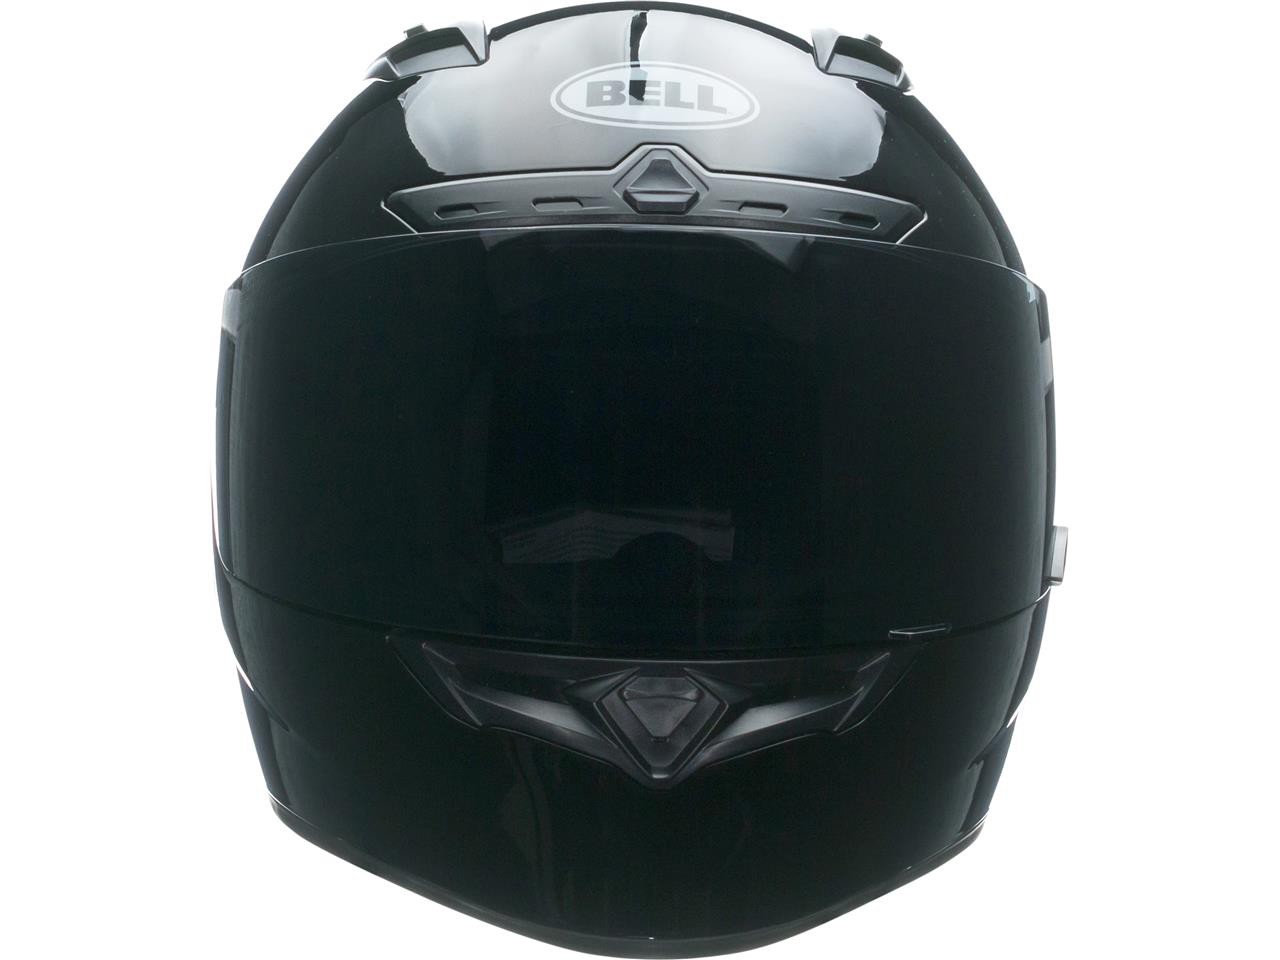 Casque Moto BELL QUALIFIER DLX MIPS SOLID GLOSS BLACK